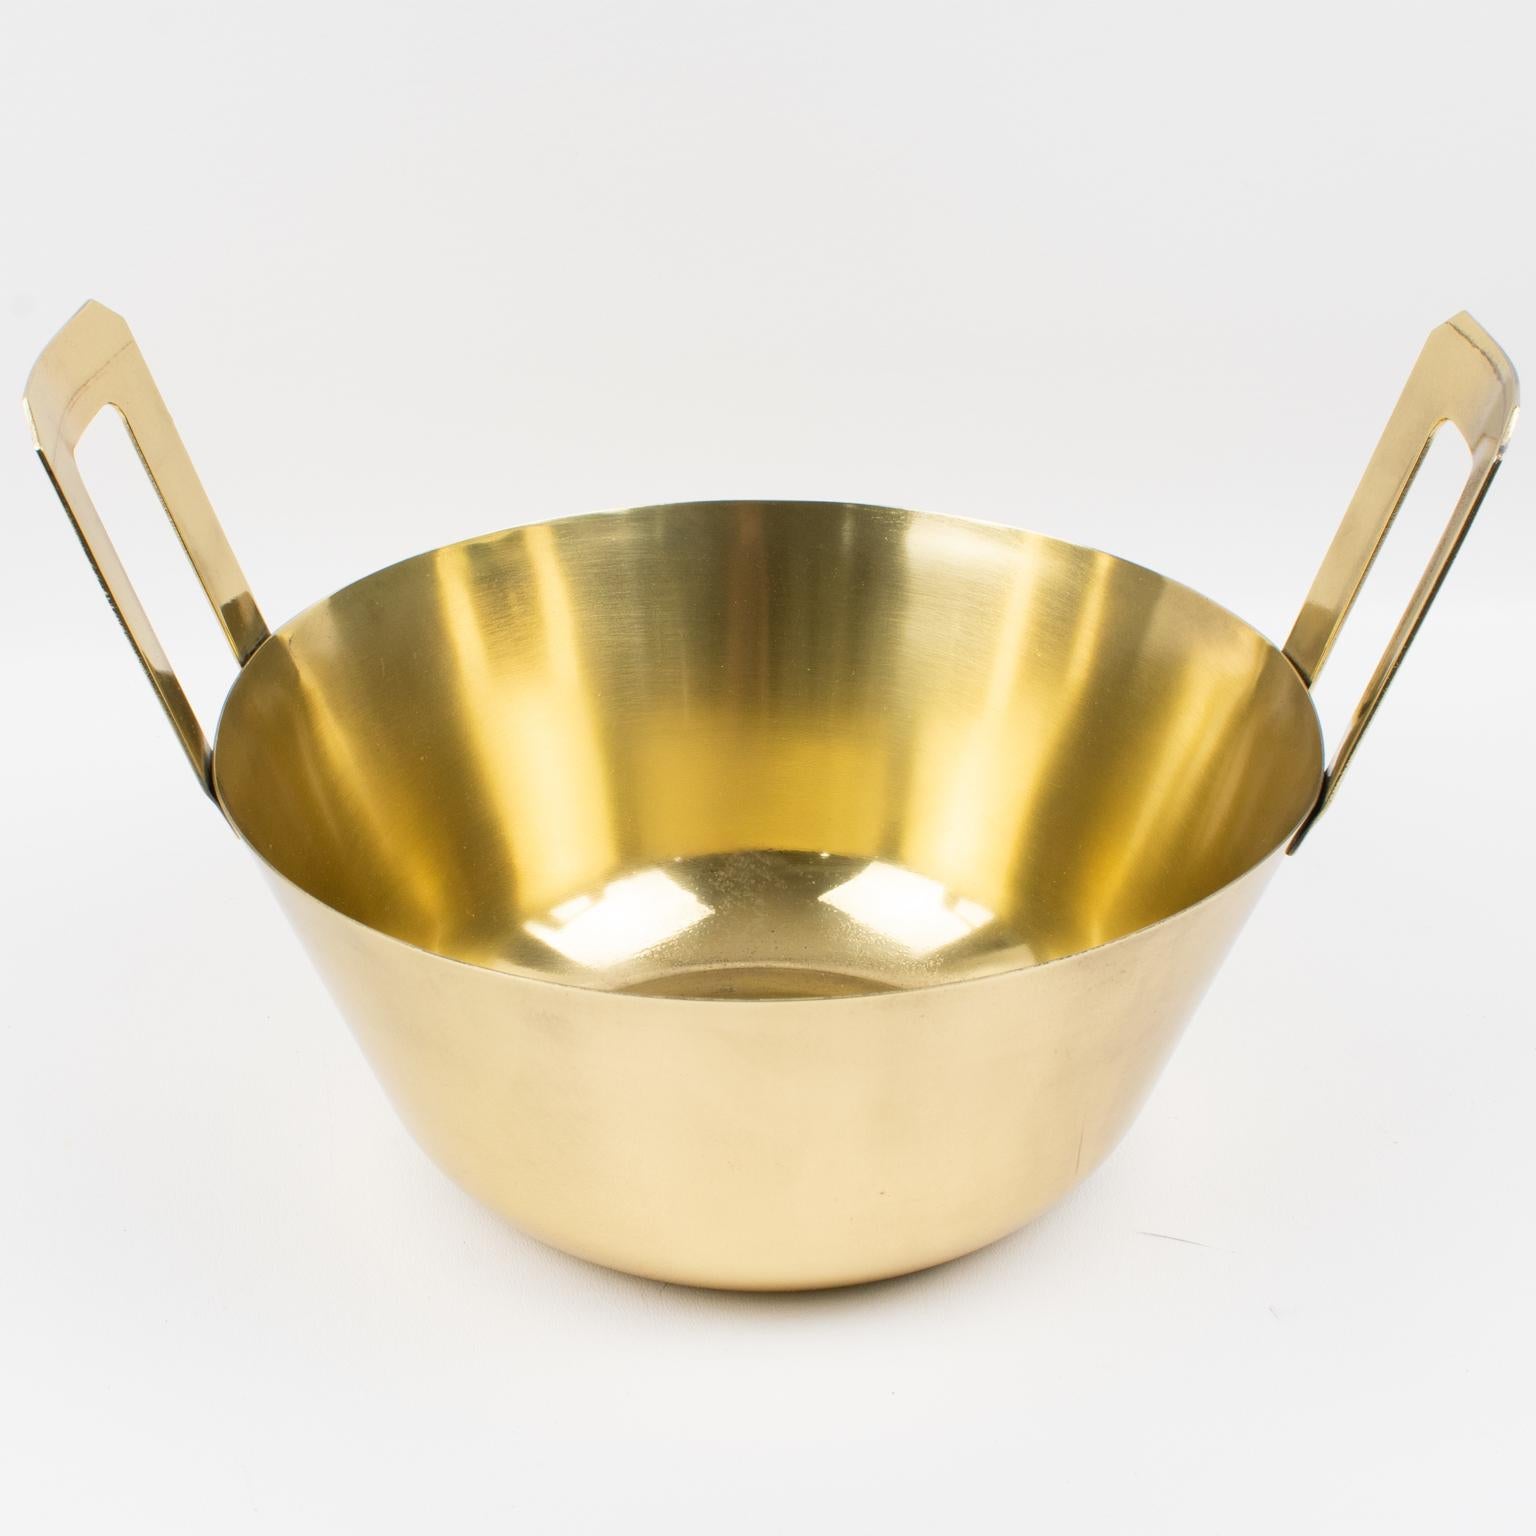 Late 20th Century Modernist Gilt Metal and Glass Decorative Bowl Centerpiece, 1980s For Sale